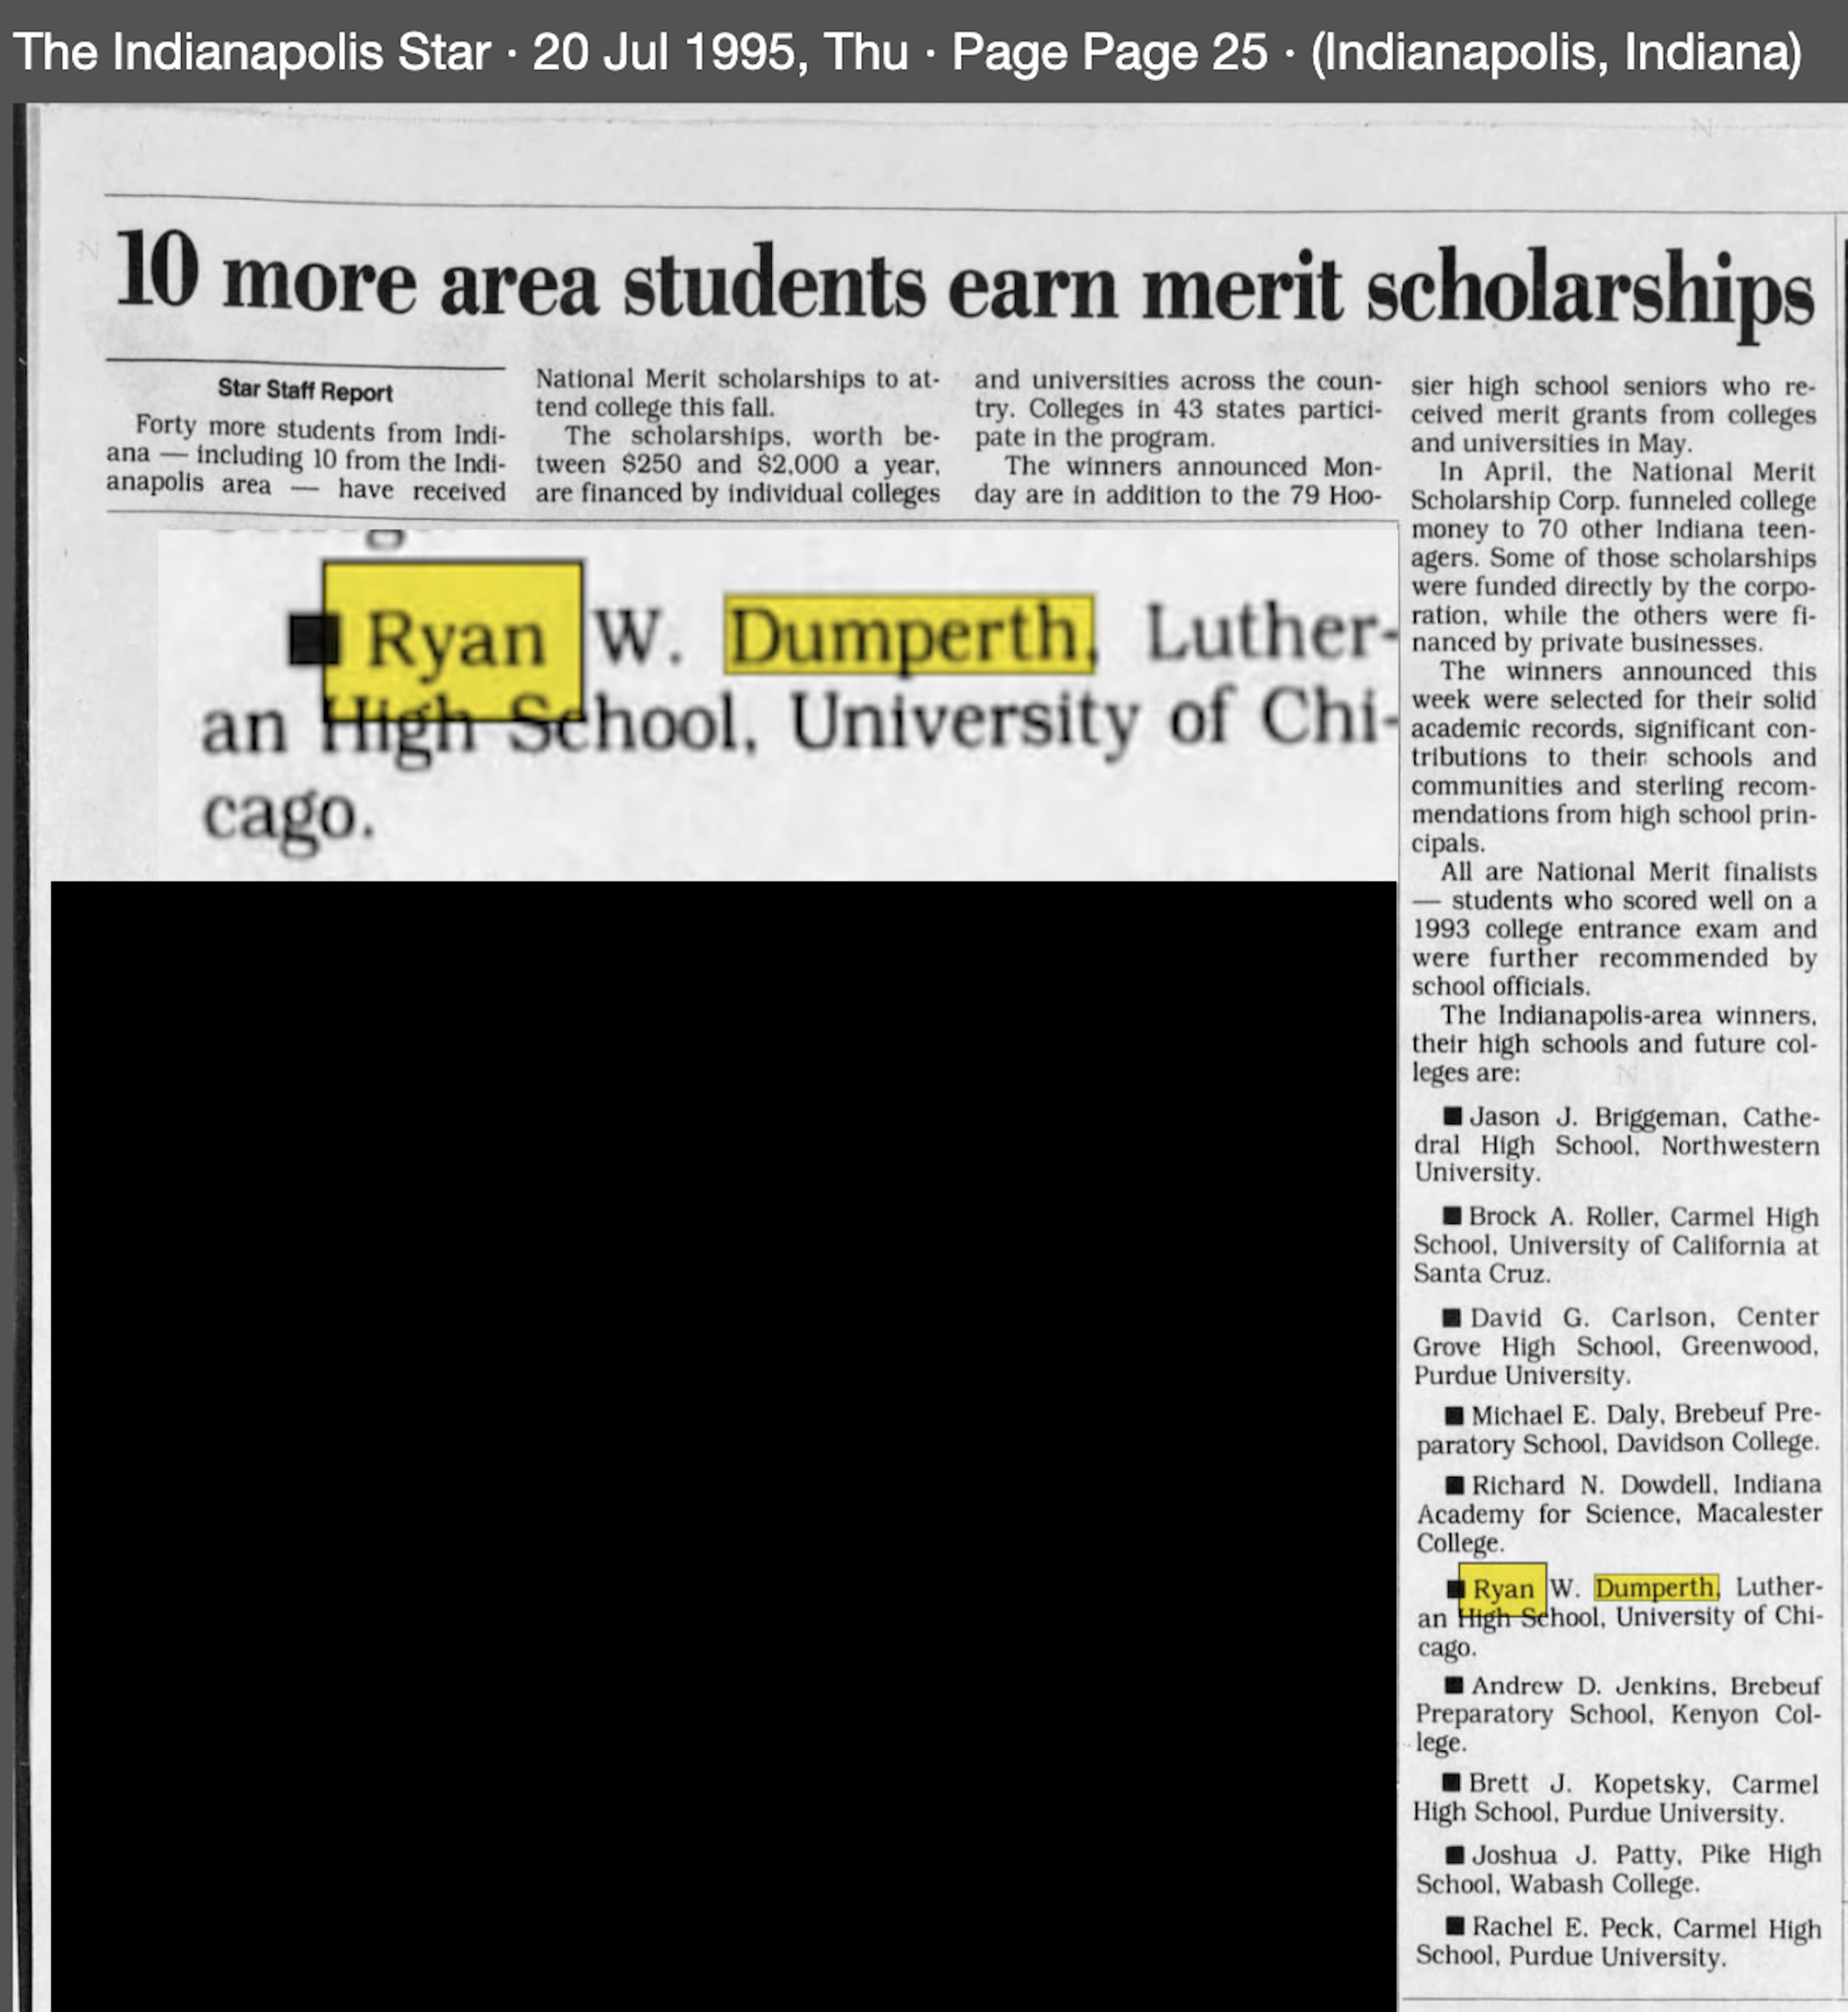 Indianapolis Star, 20 Jul 1995 article on students earning merit scholarship. Highlighted is "Ryan W. Dumperth" of "Lutheran High School" going to "University of Chicago"